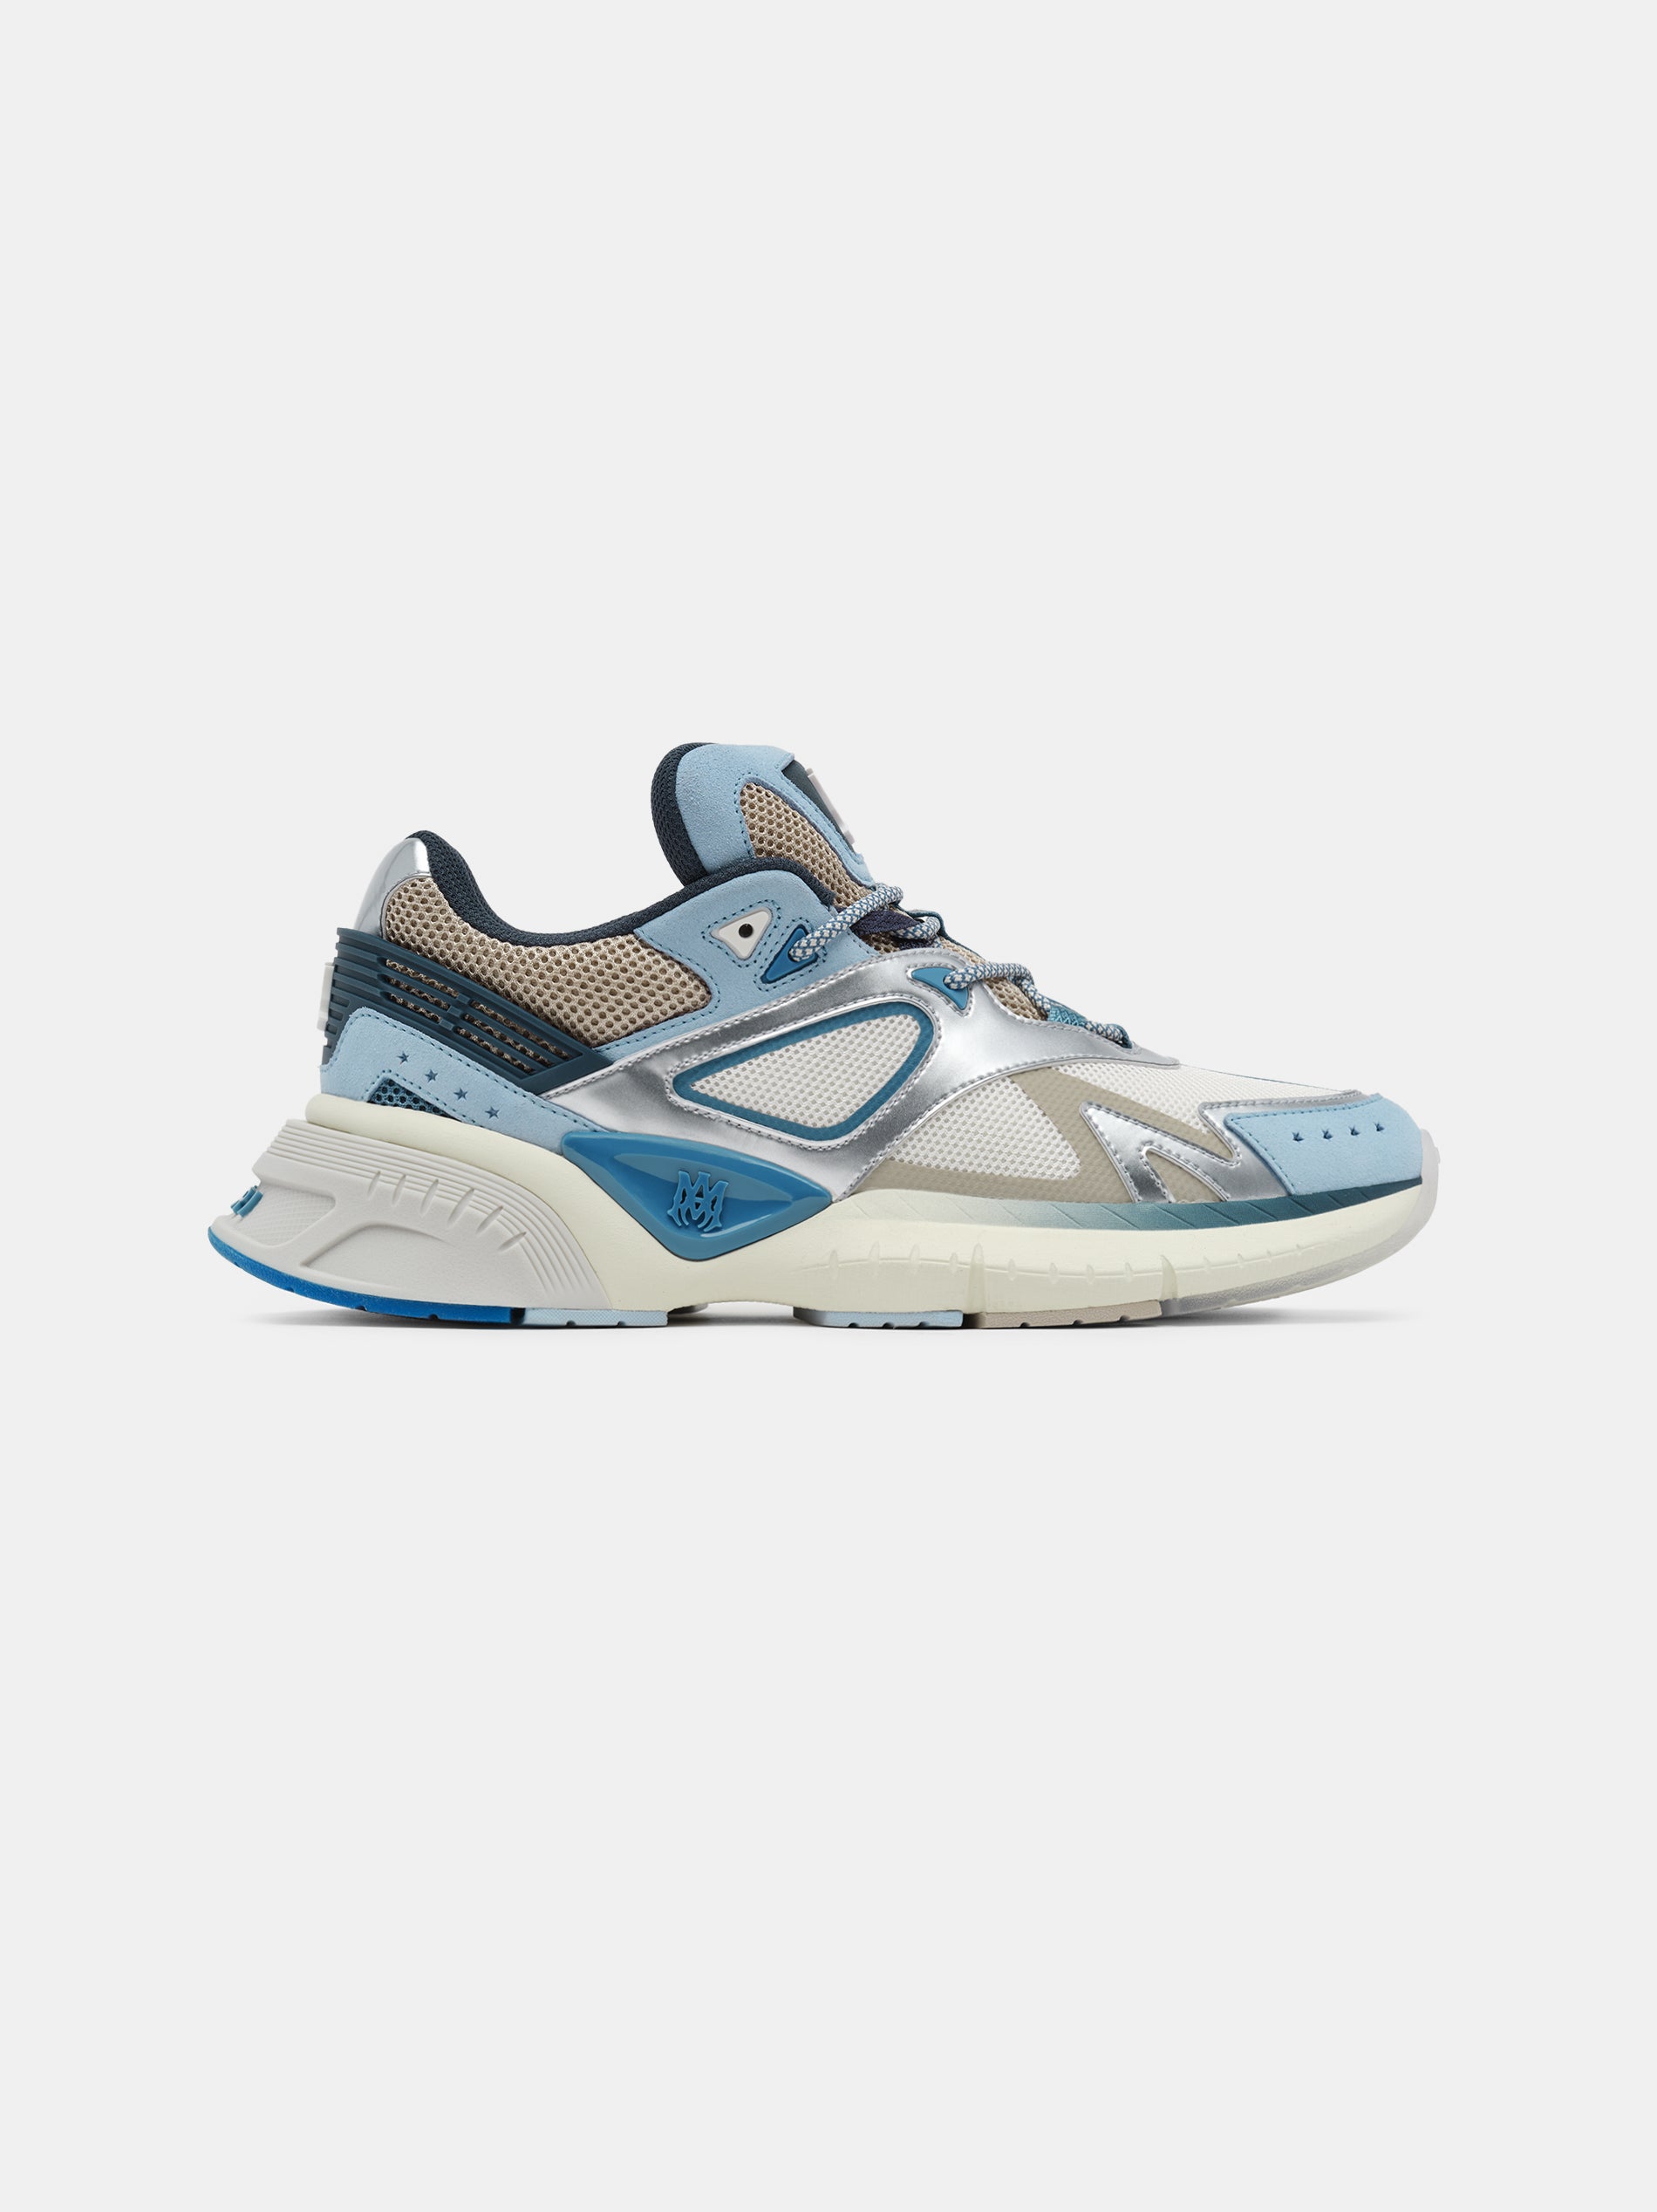 Product MA RUNNER - Blue Brown Silver featured image